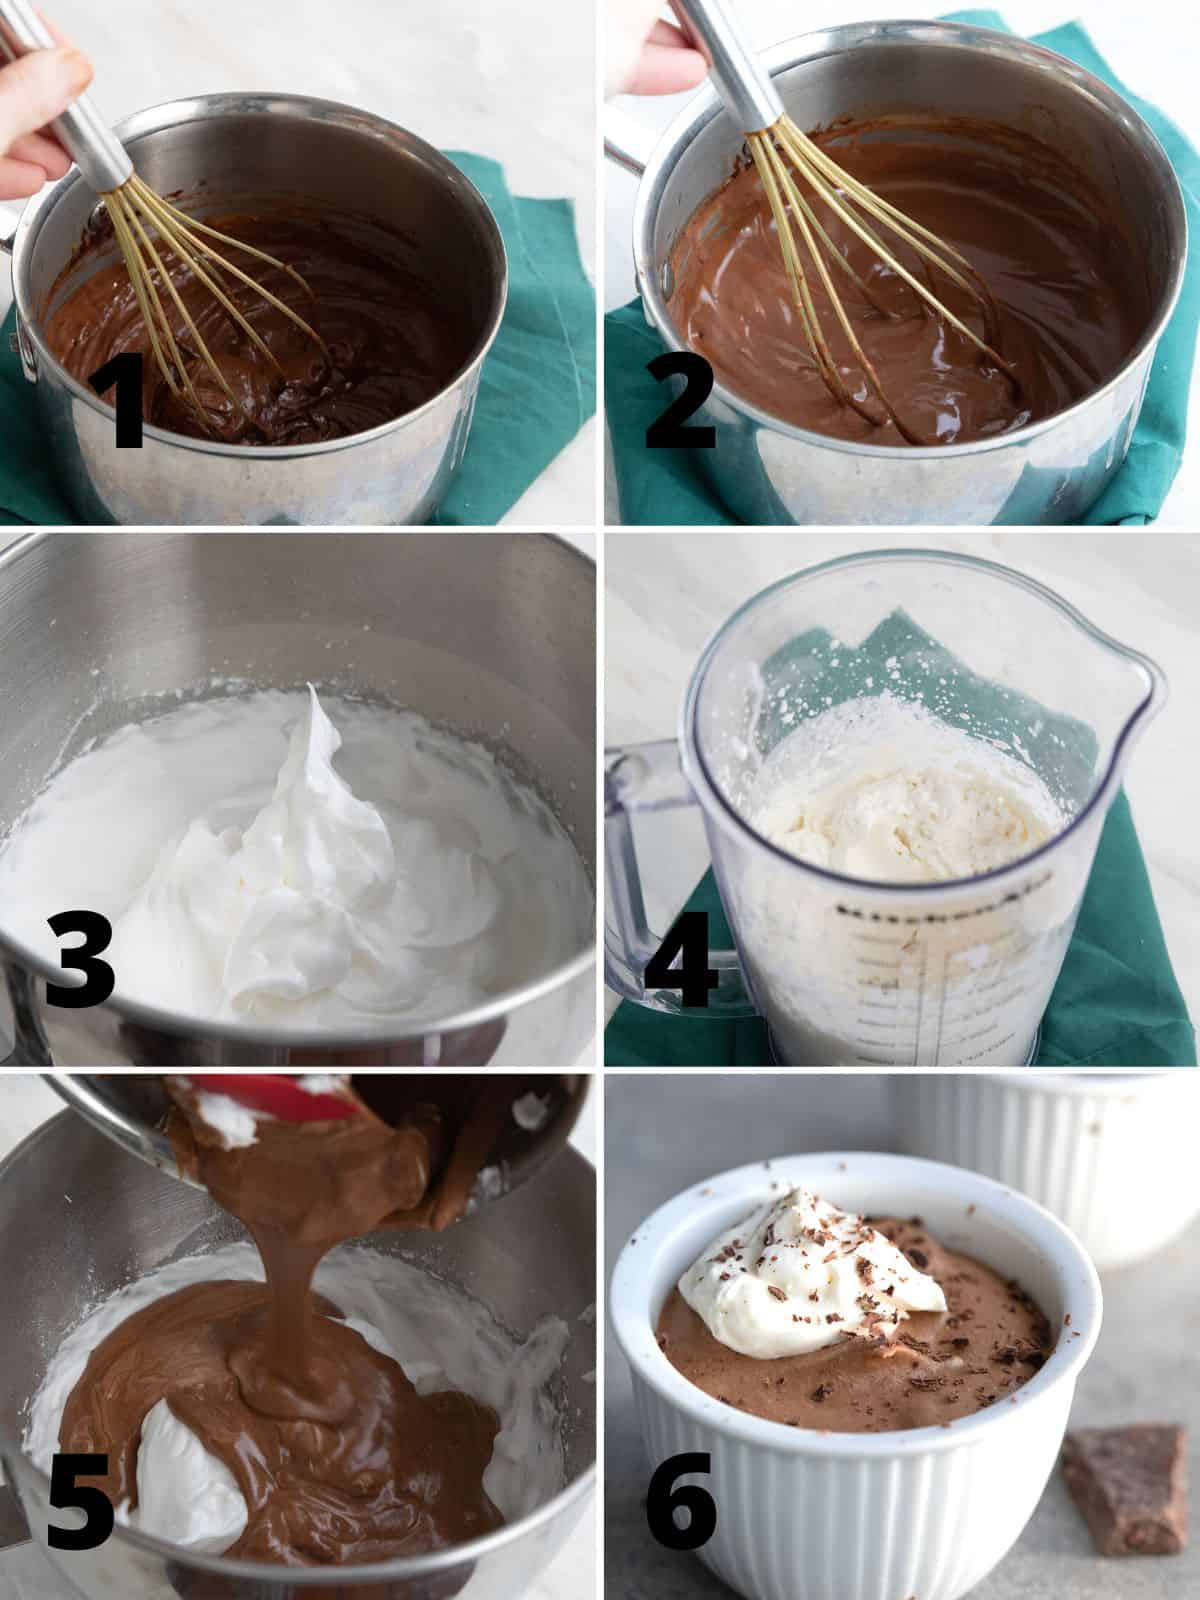 A collage of 6 images showing the steps for making Keto Chocolate Mousse.